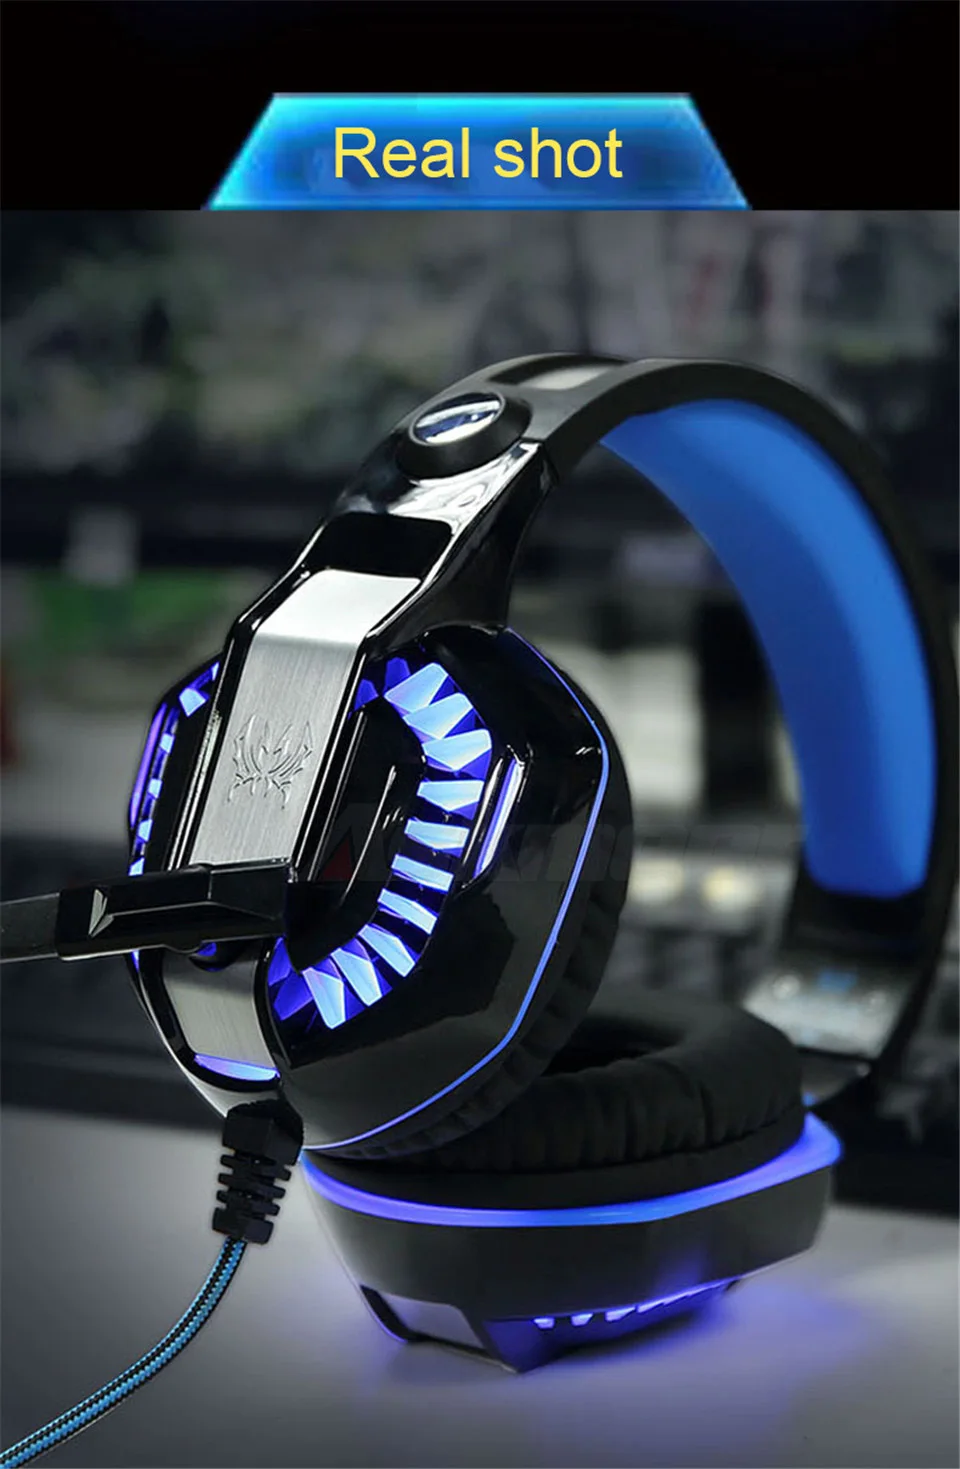 KOTION EACH PC Gaming Headset PC Gamer casque Stereo Headphones with Microphone Dazzle Lights Glow G2000 Upgrade for Computer (10)